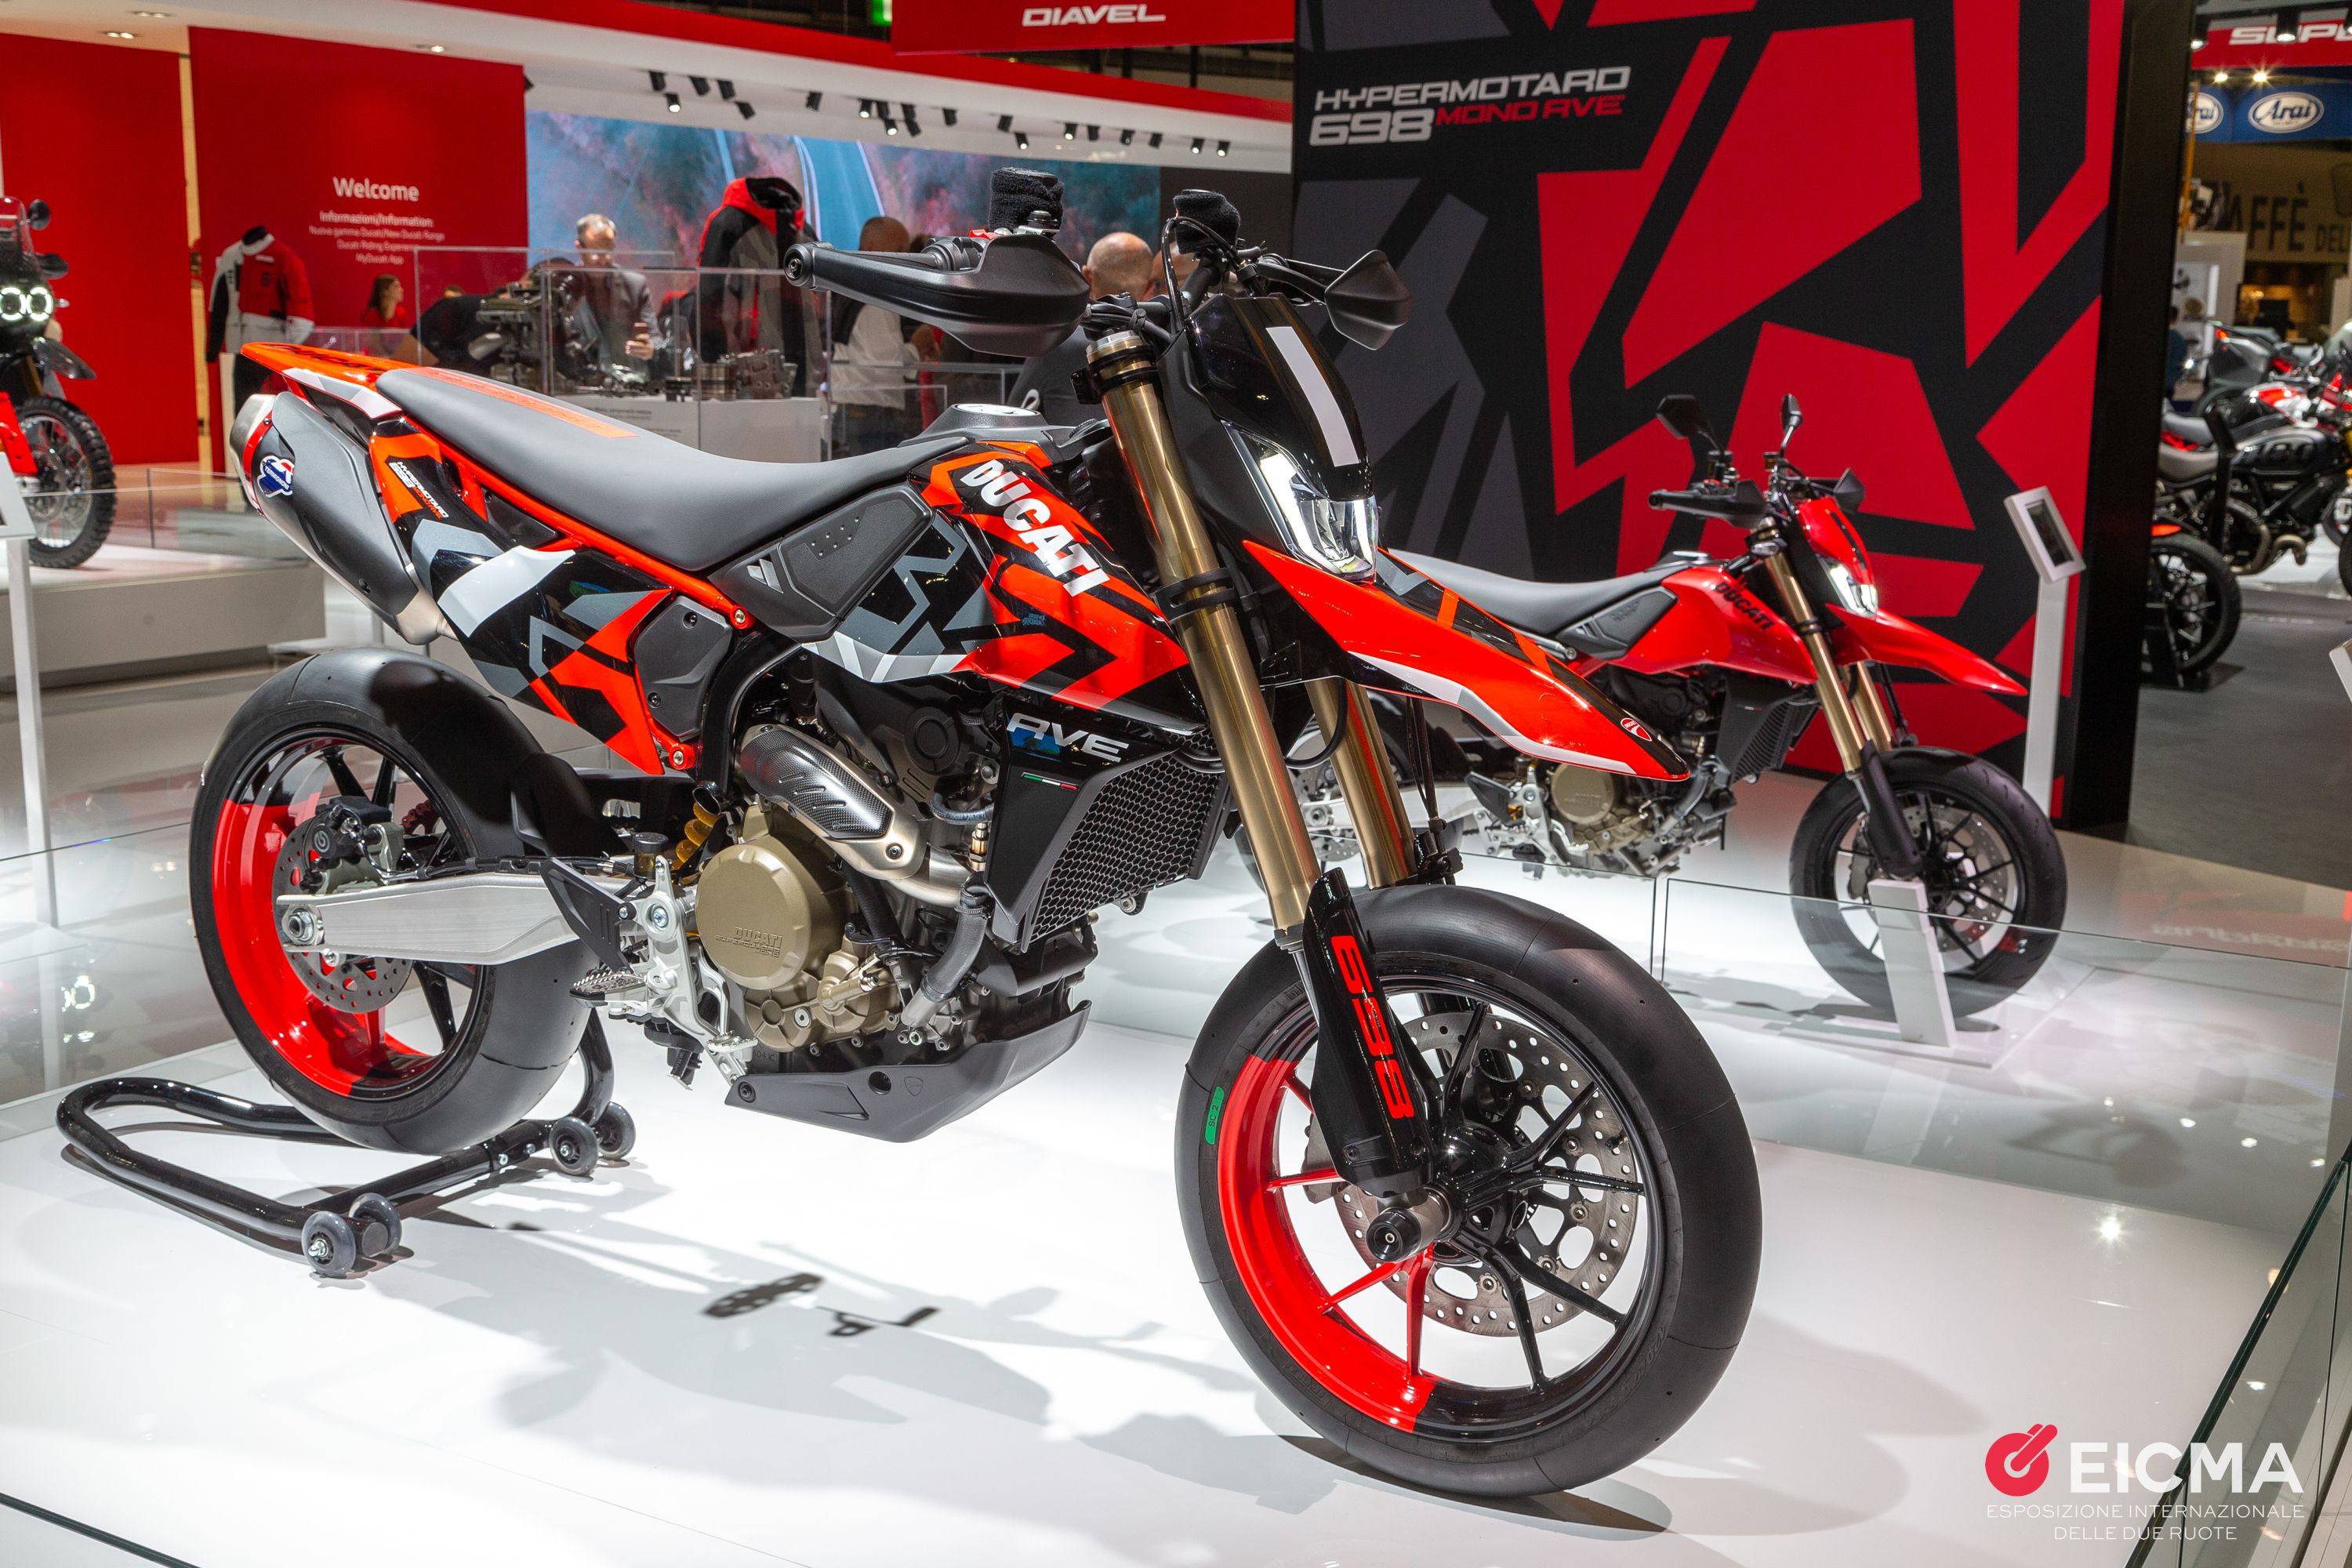 The Hypermotard single-cylinder puts out 77.5 hp. Courtesy EICMA